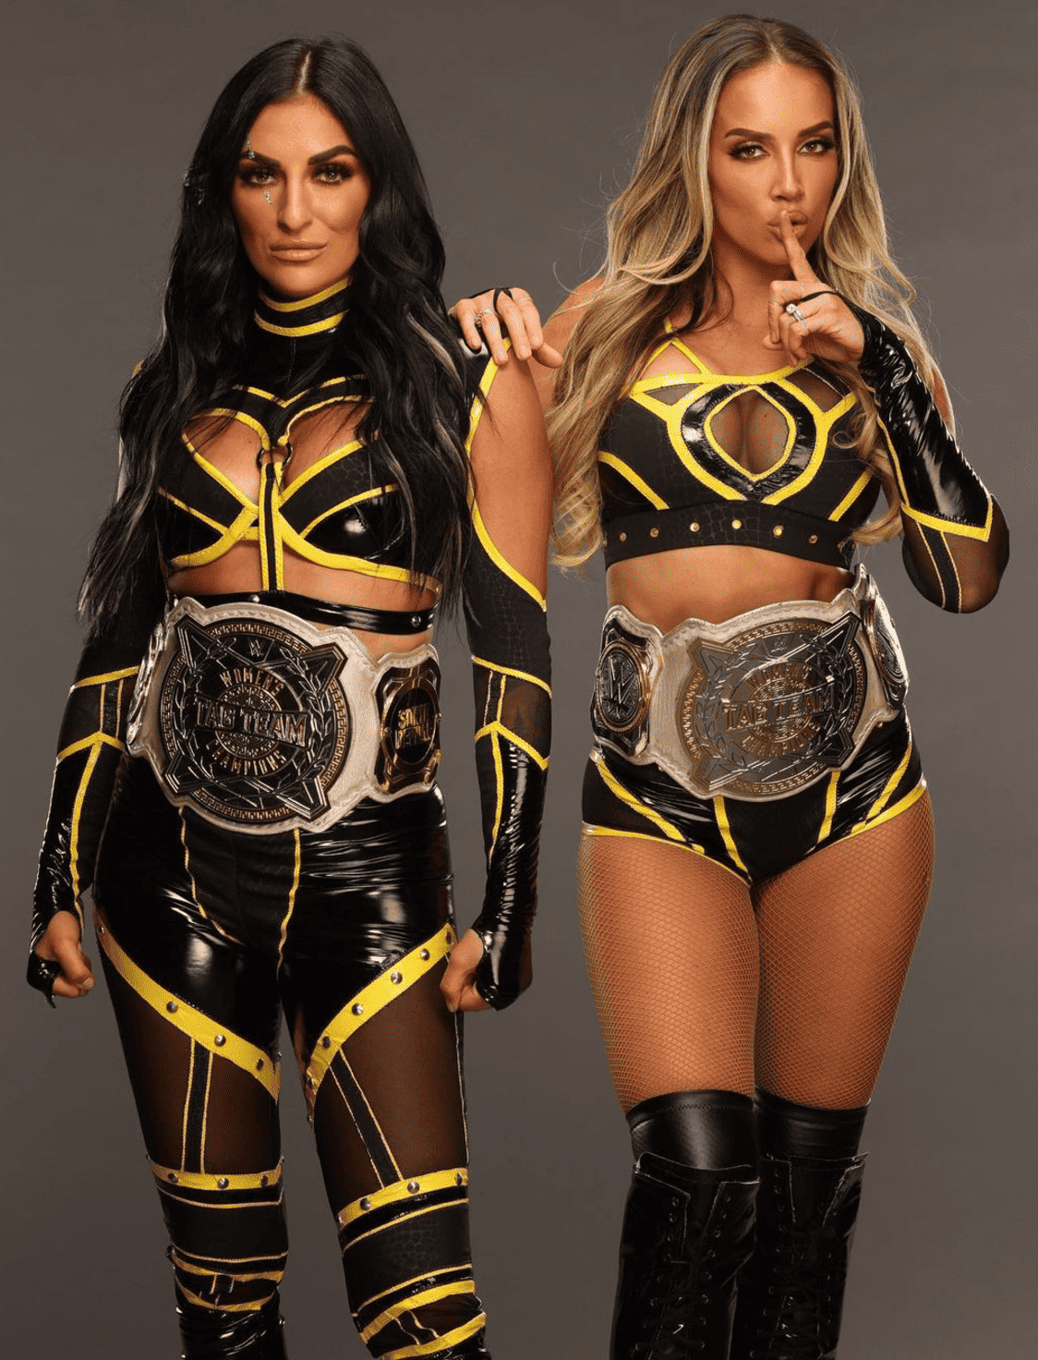 WWE Women's Tag Team Champions banner August 7 2023 Chelsea Green Sonya Deville photo shoot 1